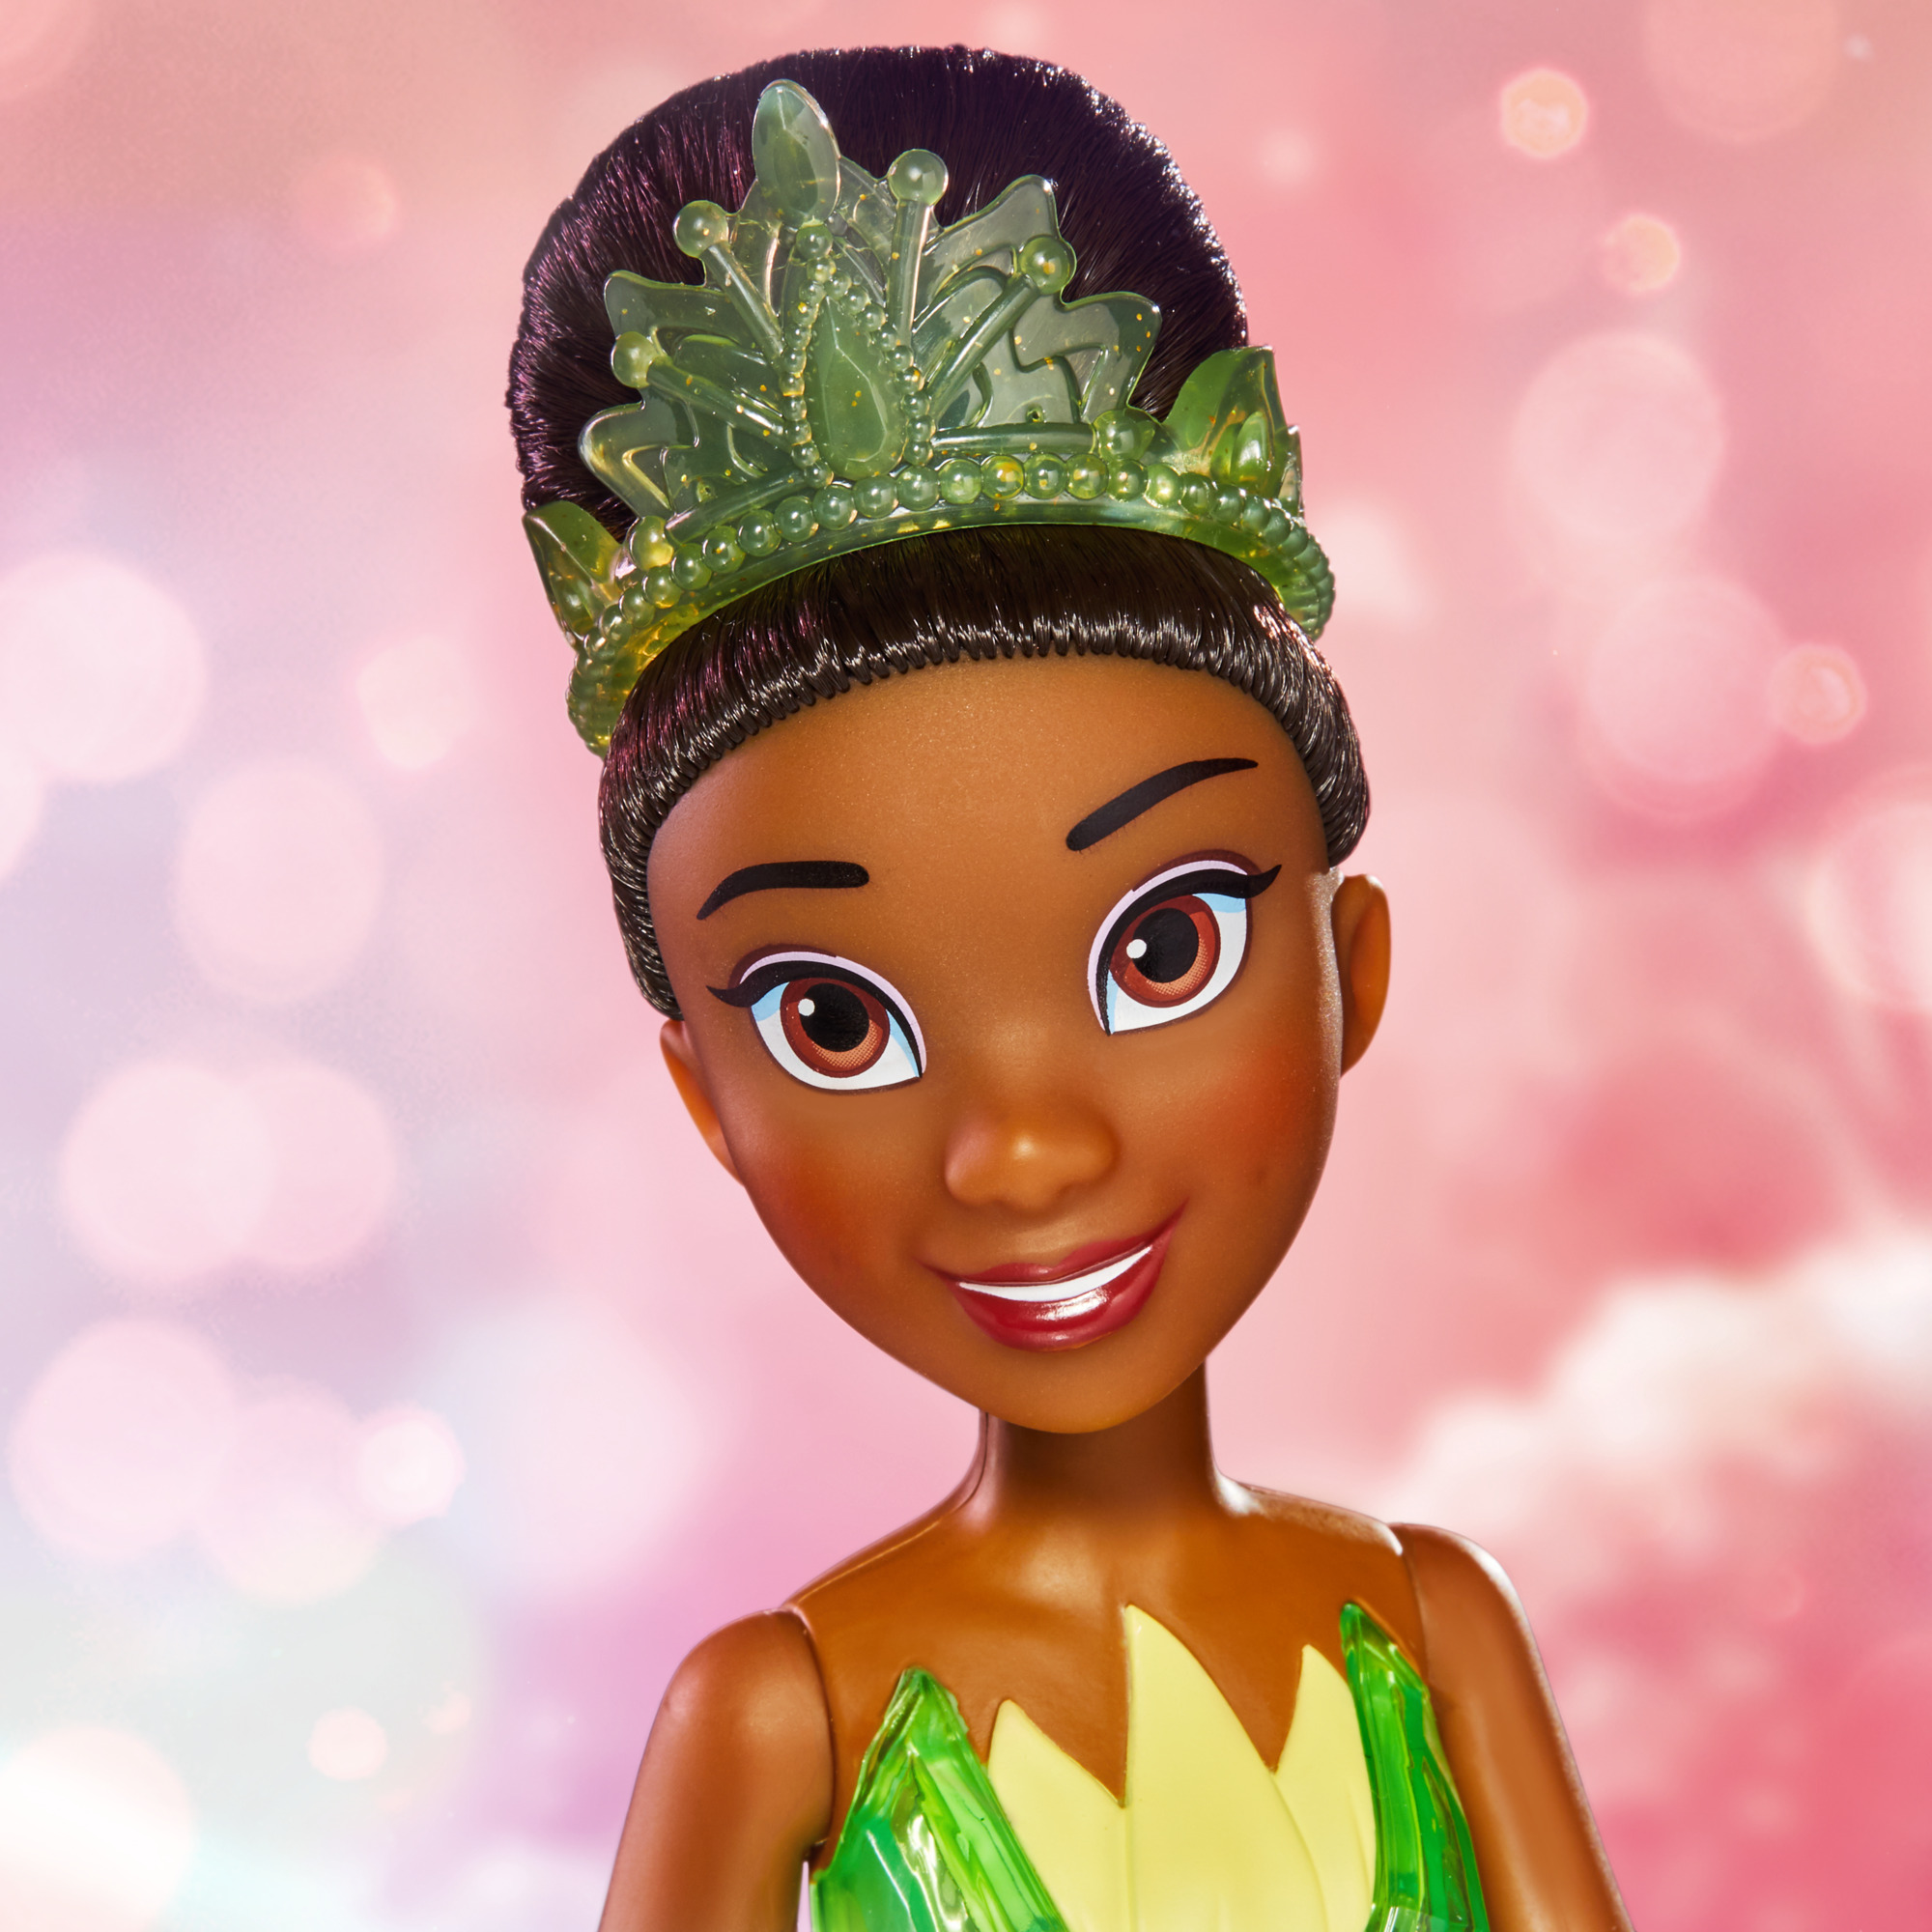 Disney Princess Royal Shimmer Tiana Fashion Doll, Accessories Included - image 7 of 9